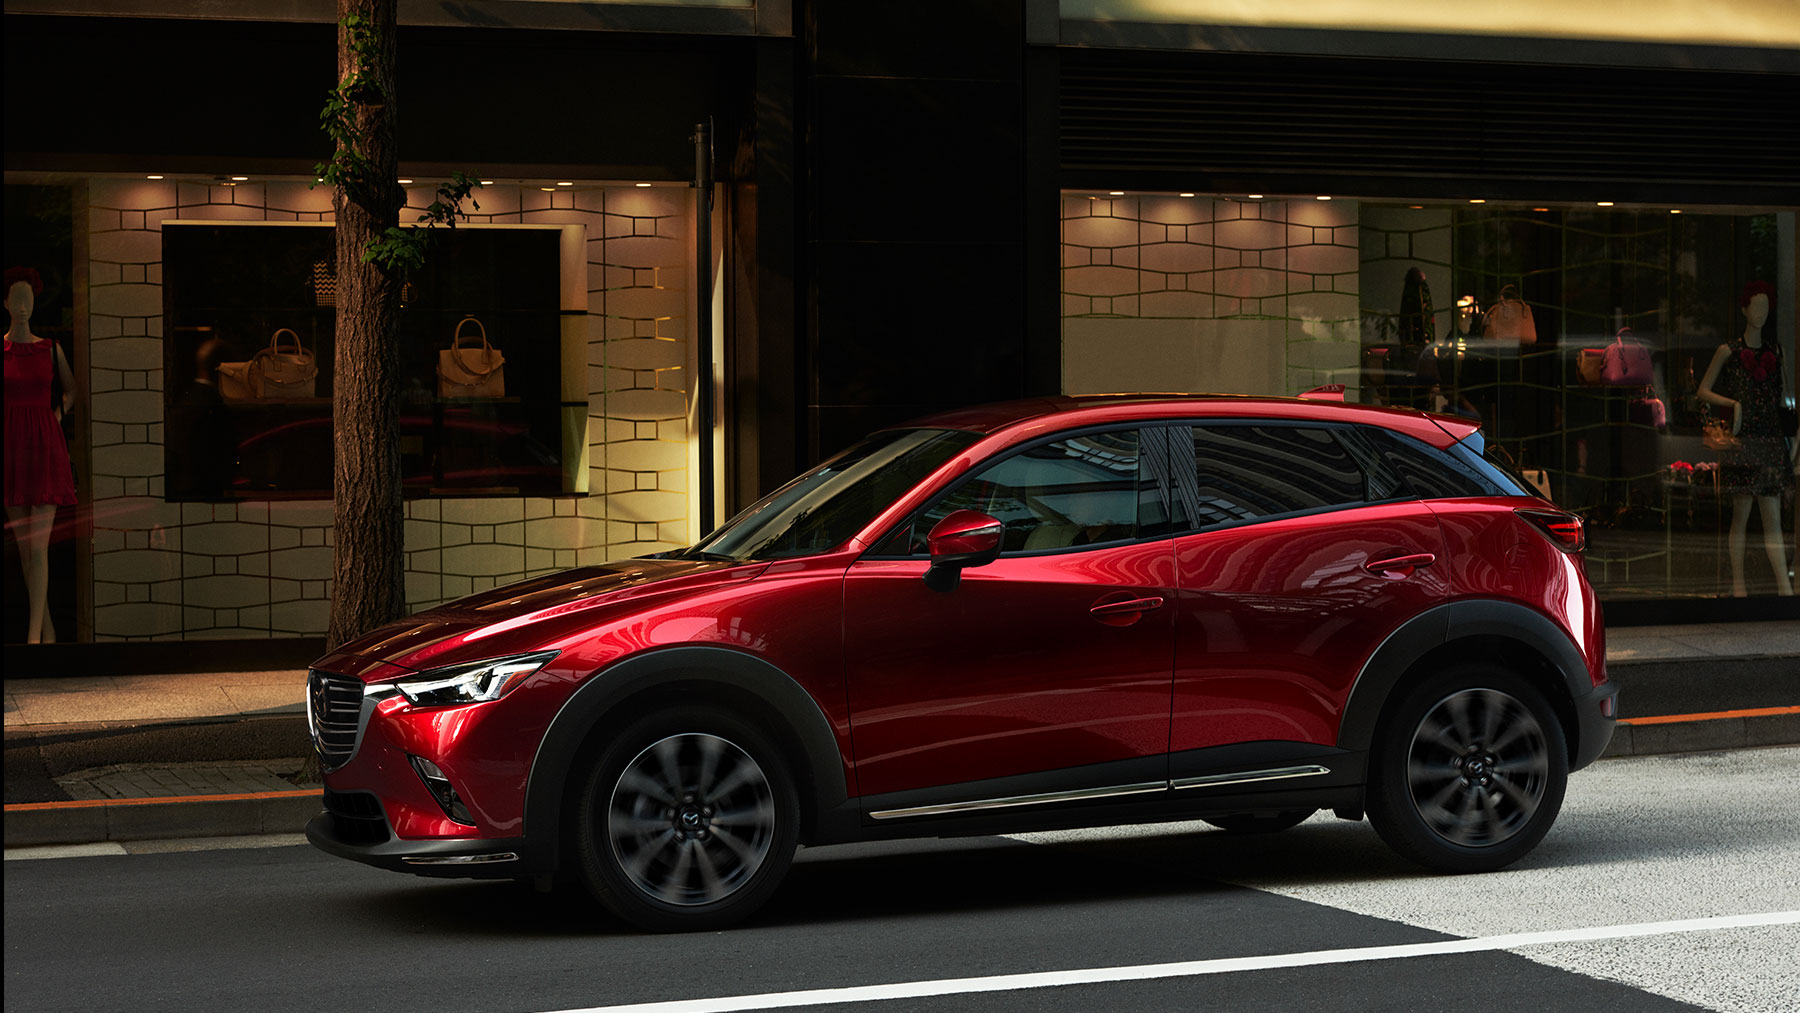 Image of a red 2019 Mazda CX-3.